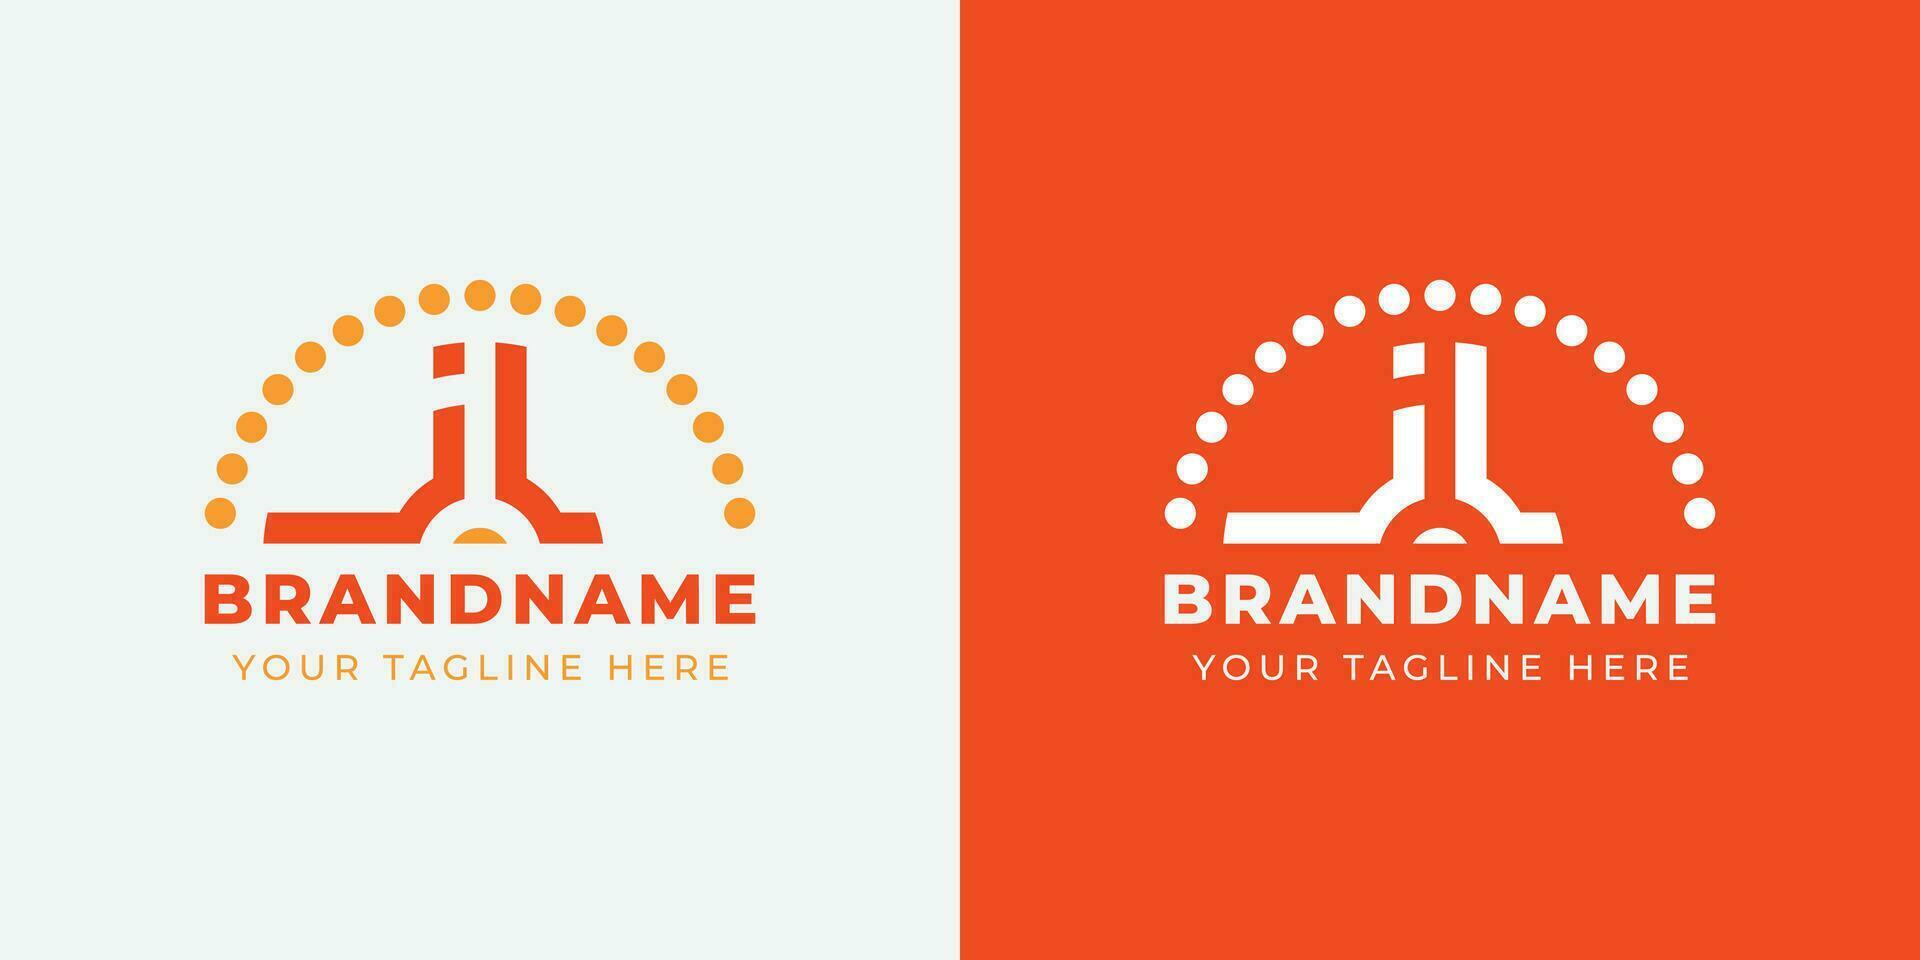 Letter JL and LJ Sunrise  Logo Set, suitable for any business with JL or LJ initials. vector